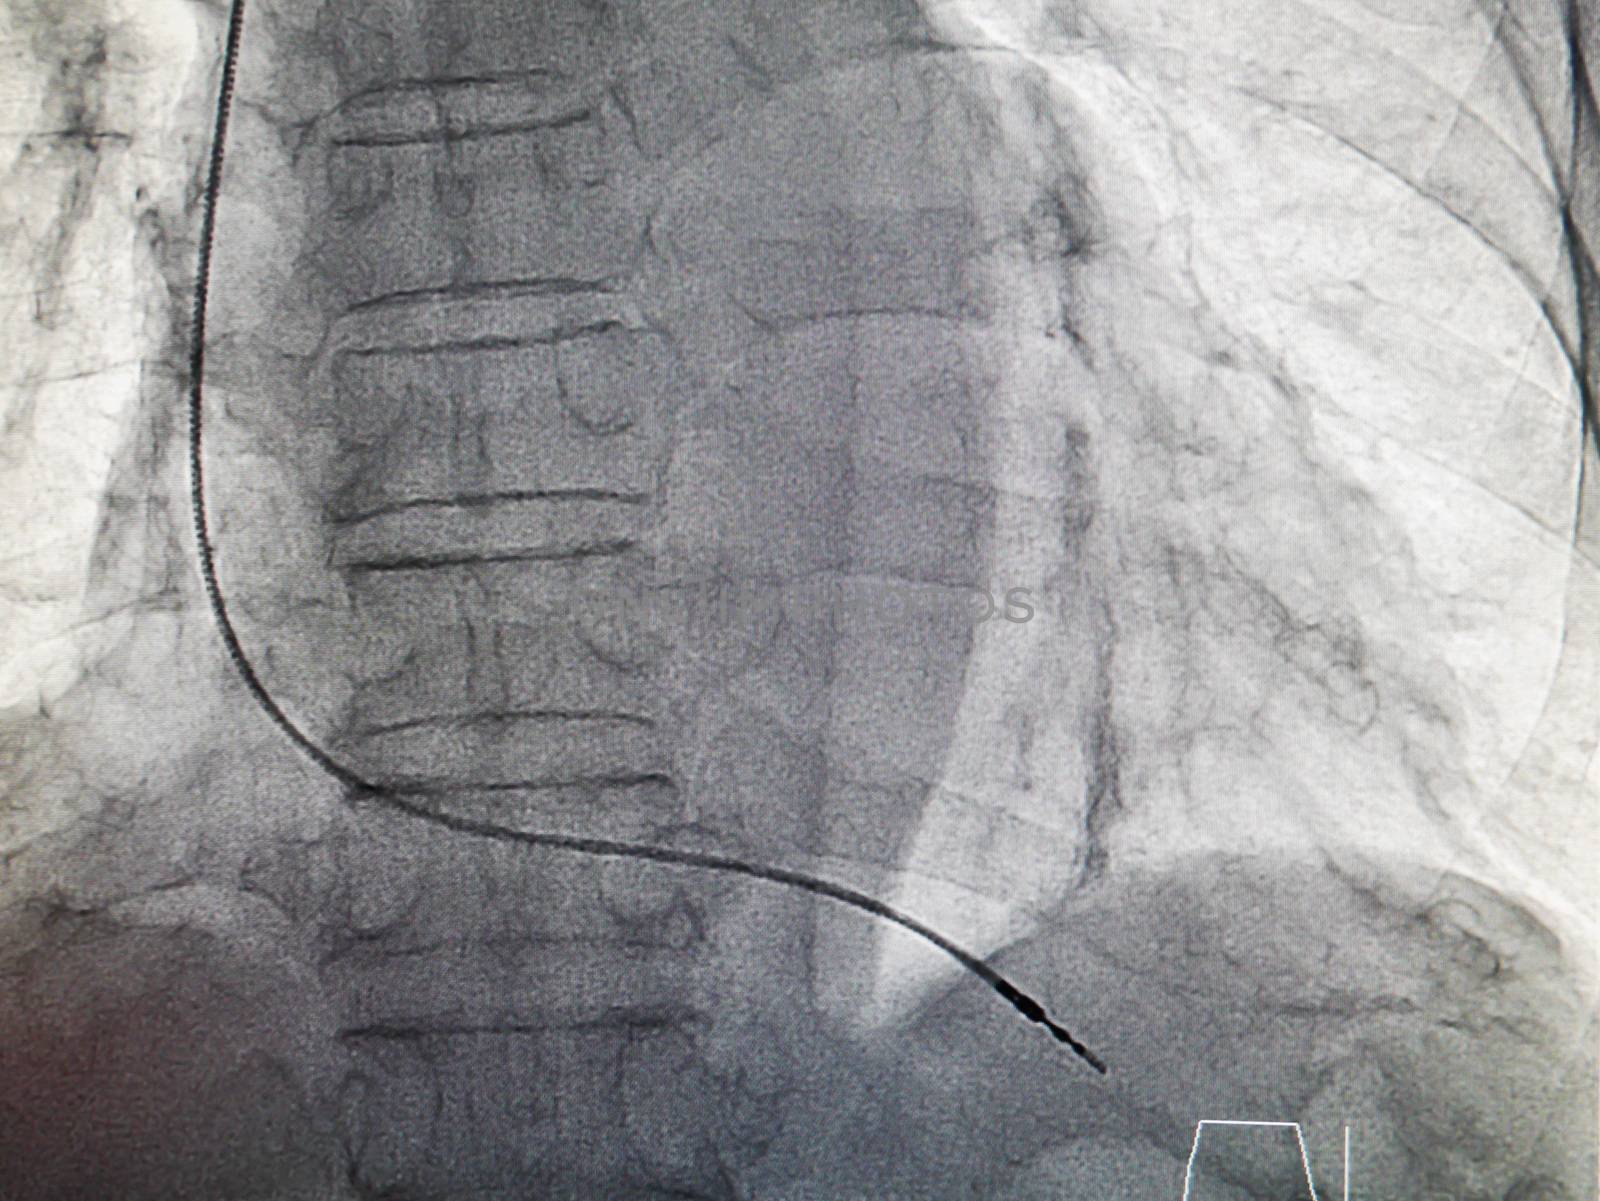 VVIR pacemaker cable in x-ray image in cardiac catheterization laboratory